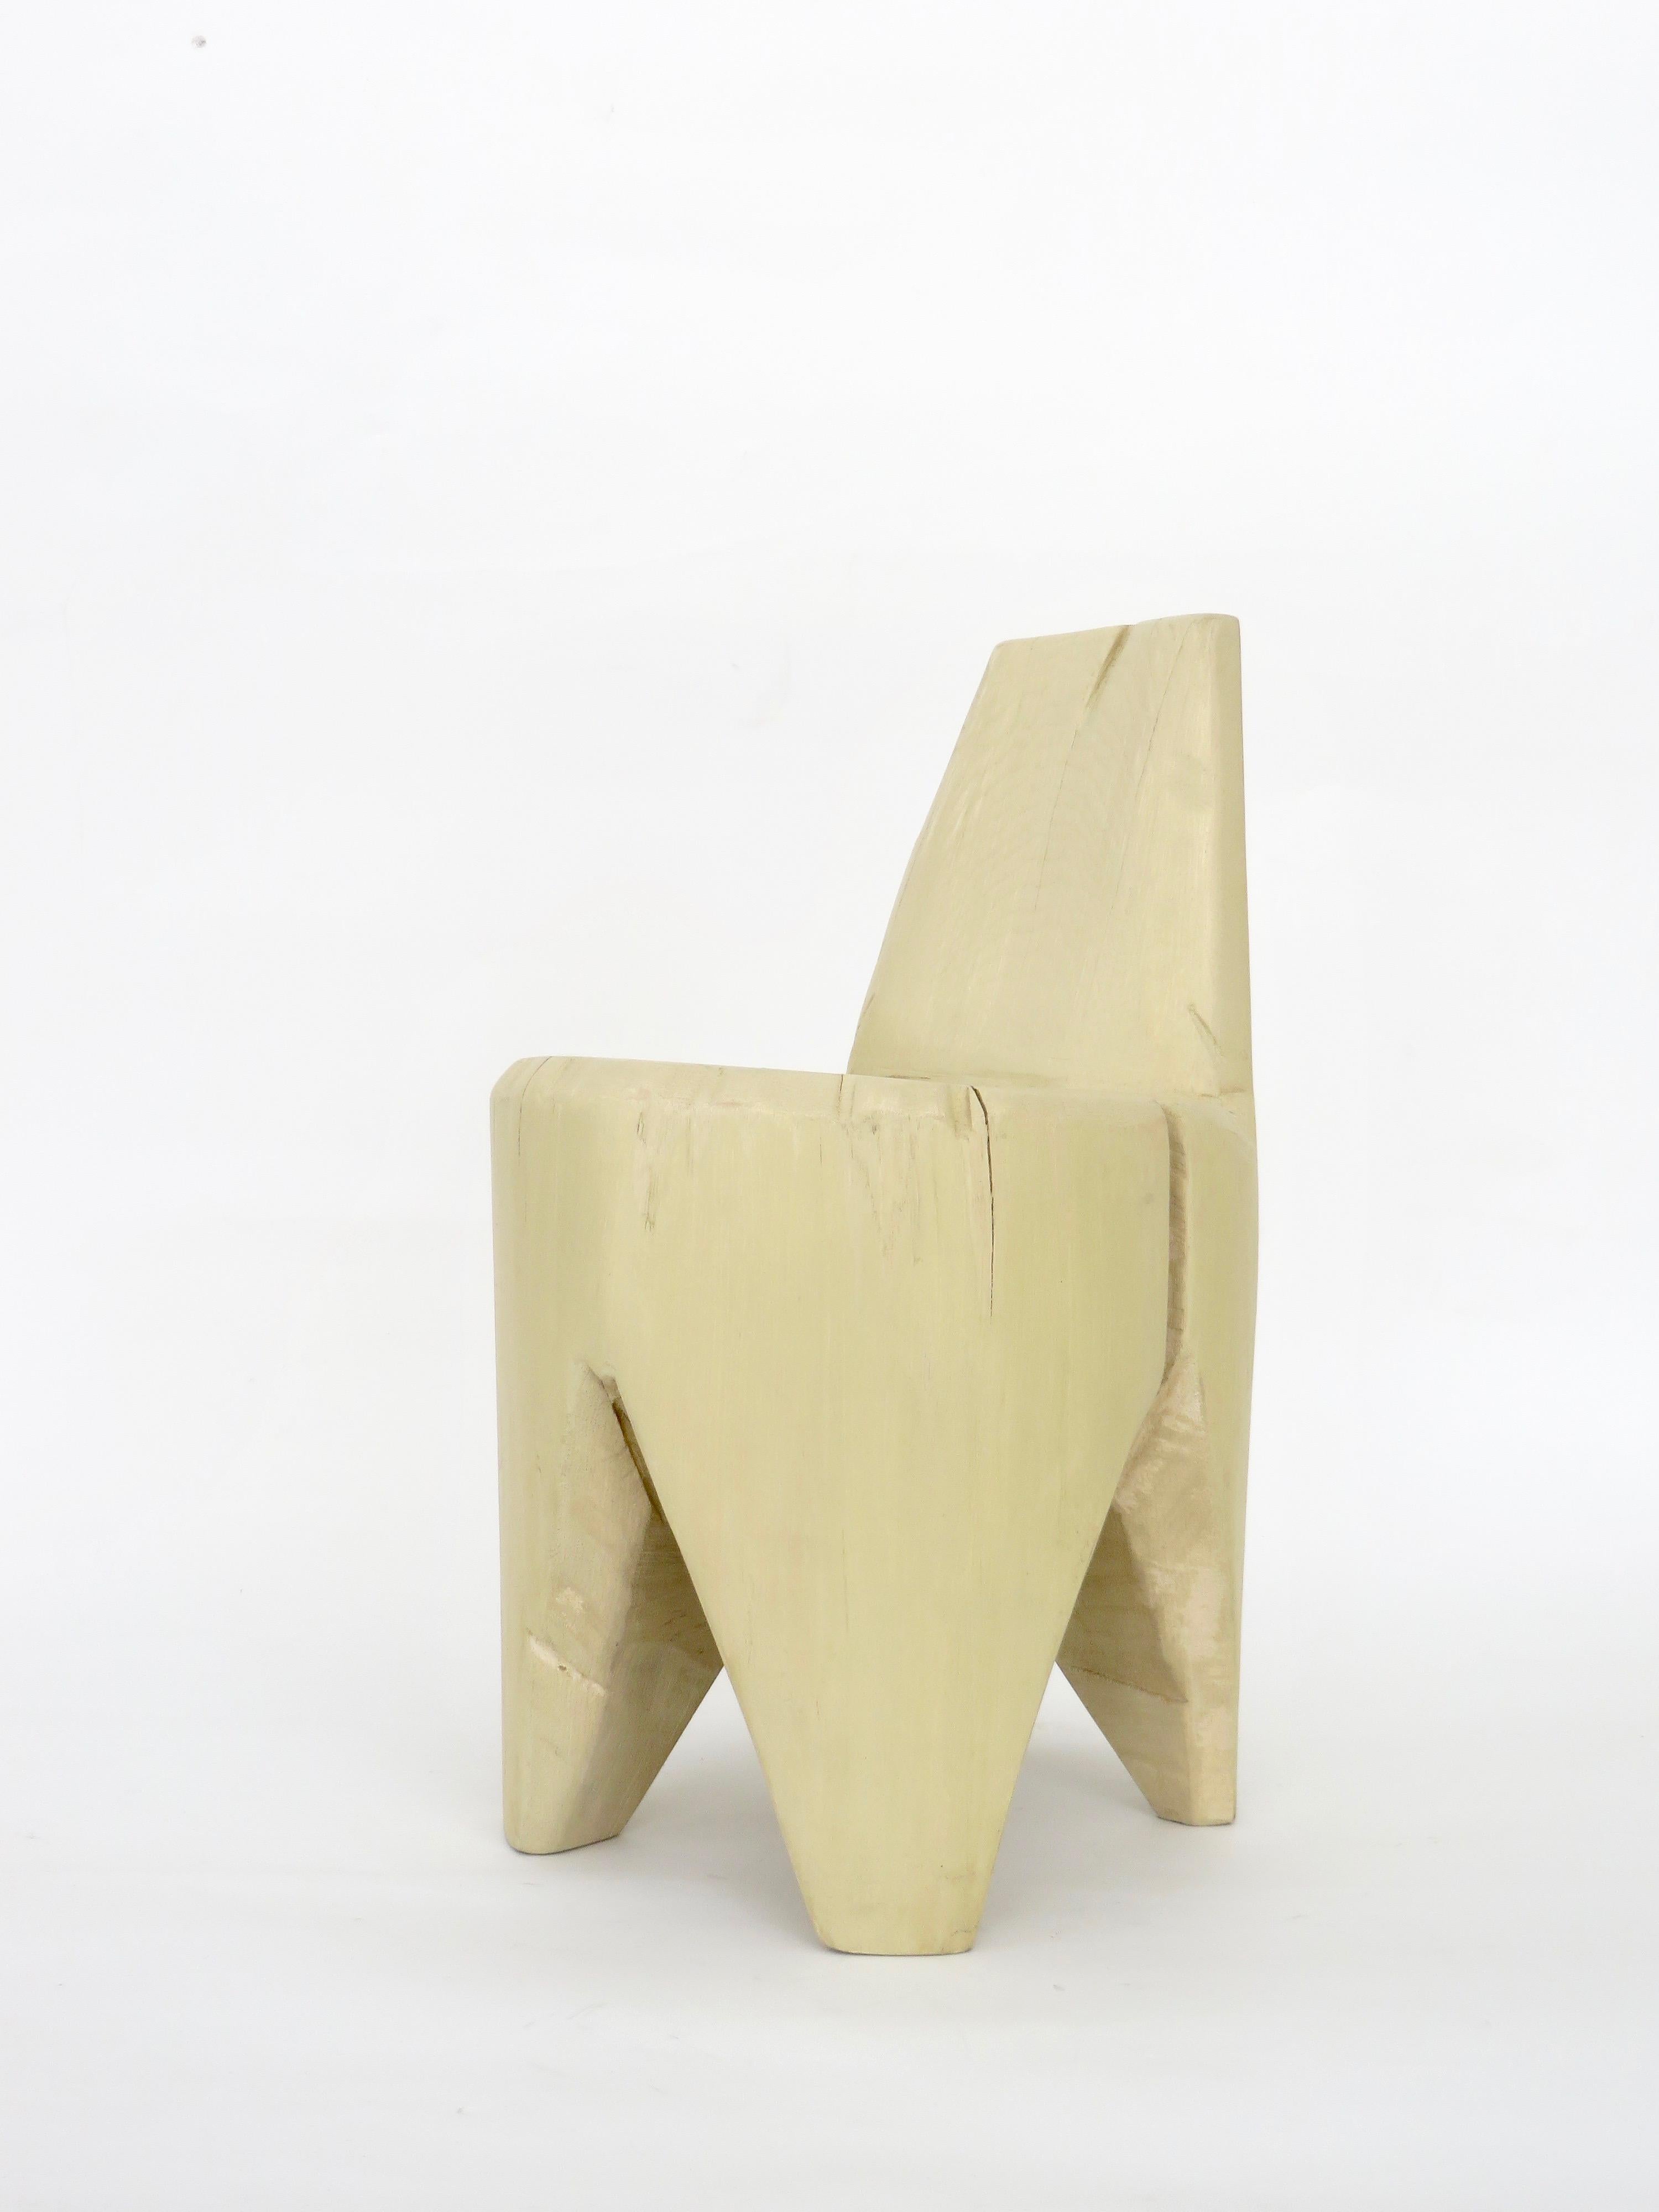 Hannah Vaughan Contemporary Carved Sculptural Chair, 2019 1